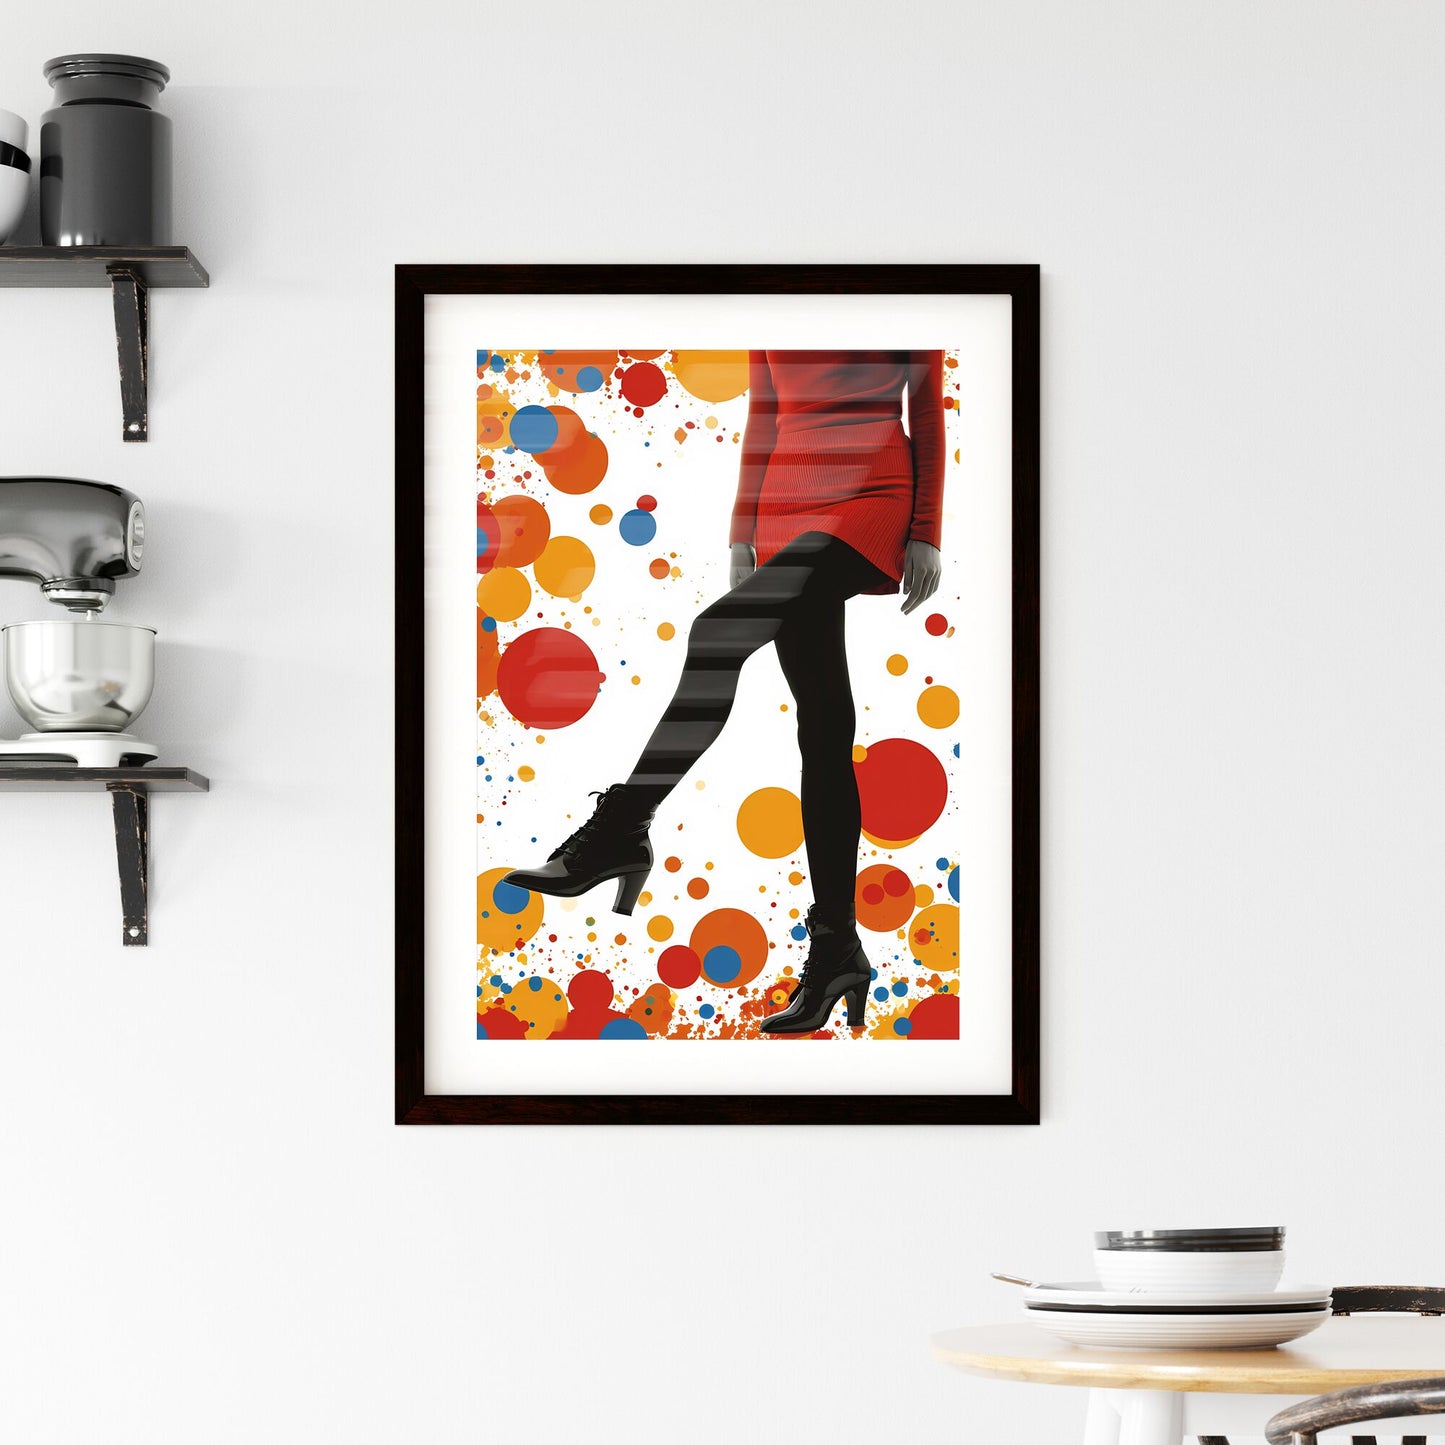 Pin up pedigree pinups 50s - Art print of a woman in a red dress and black tights Default Title